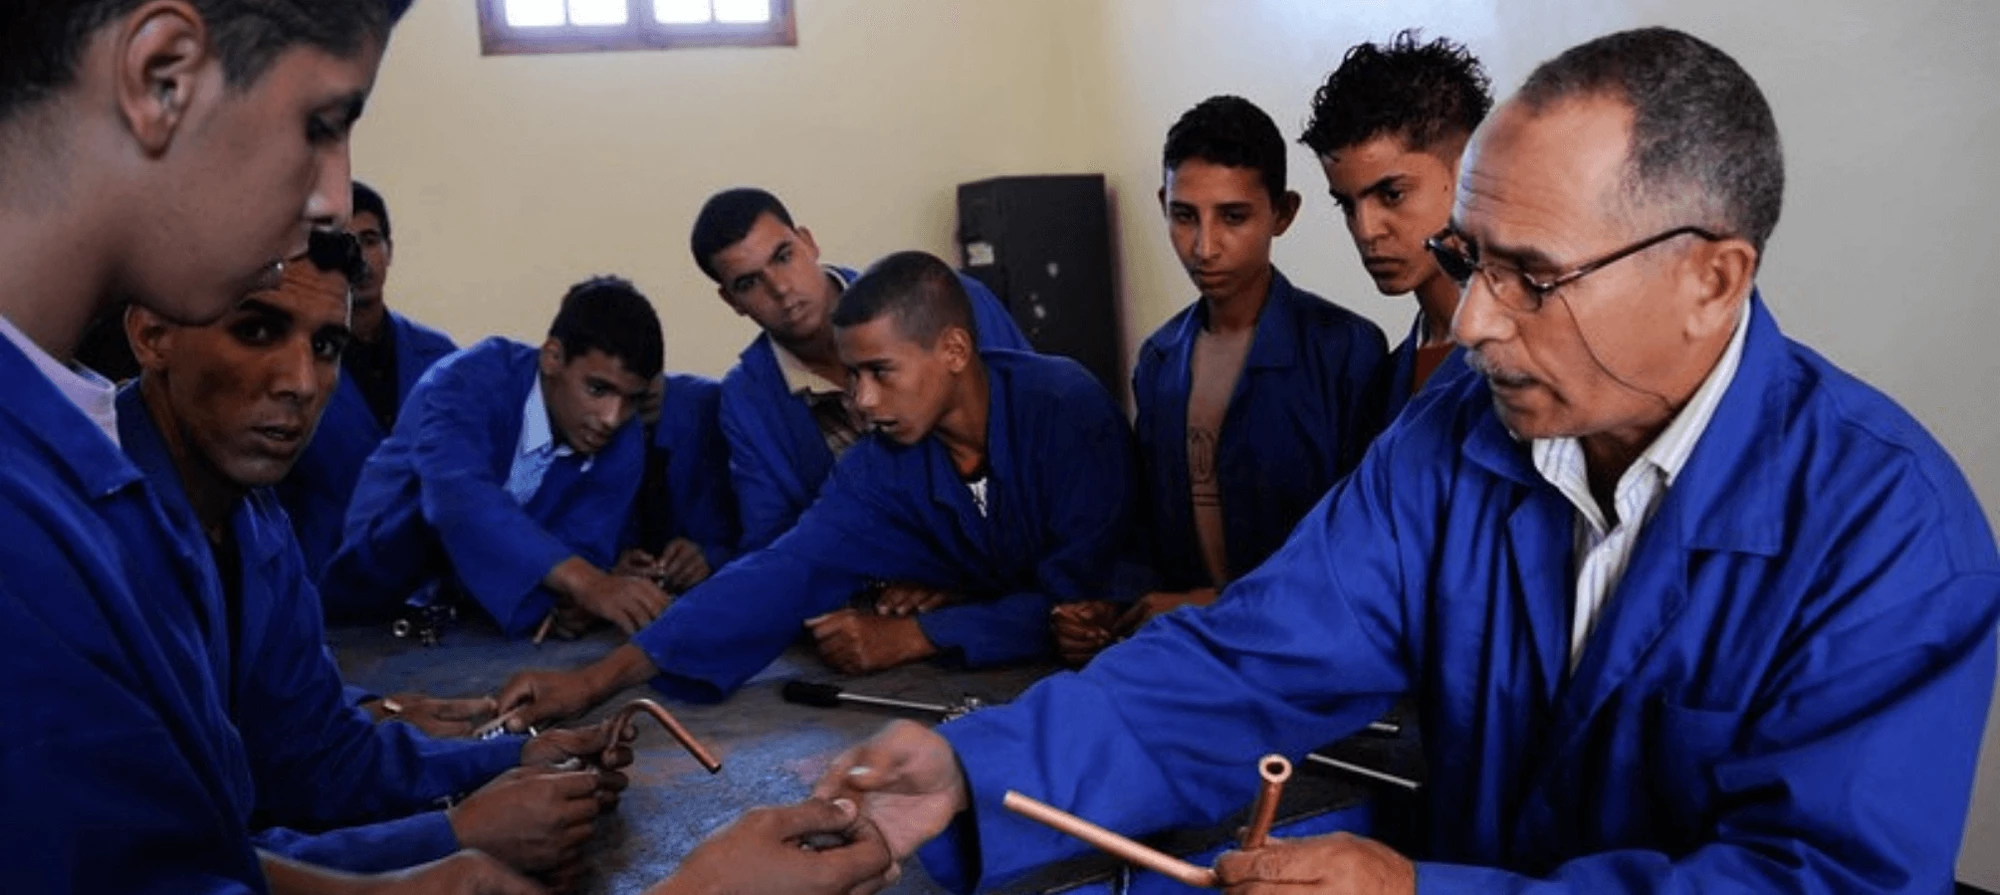 students in a vocational training class